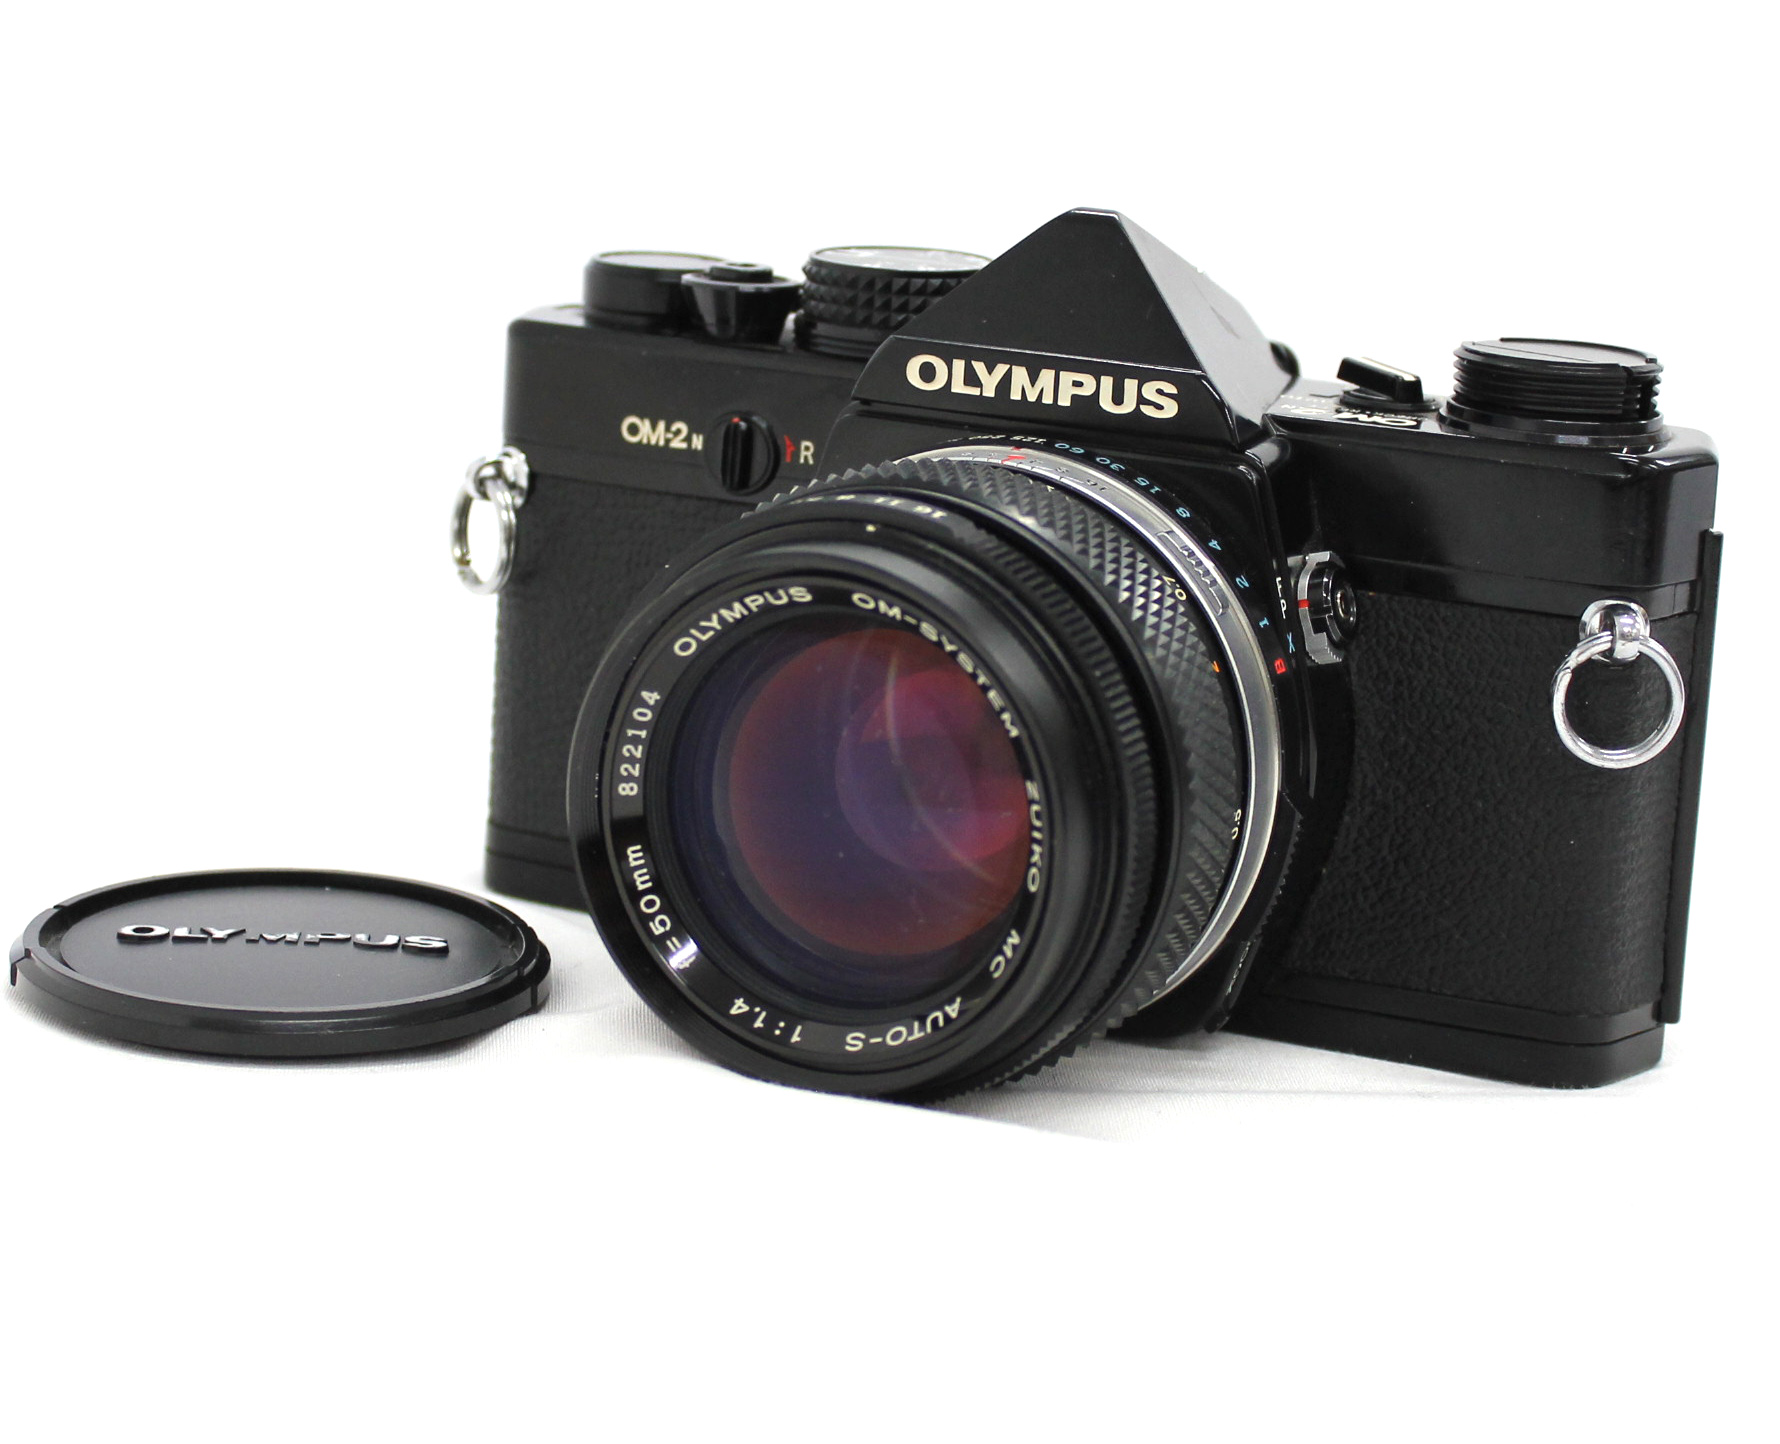 [Excellent+++] Olympus OM-2n Black with OM-System Zuiko MC AUTO-S 50mm F/1.4 Lens from Japan